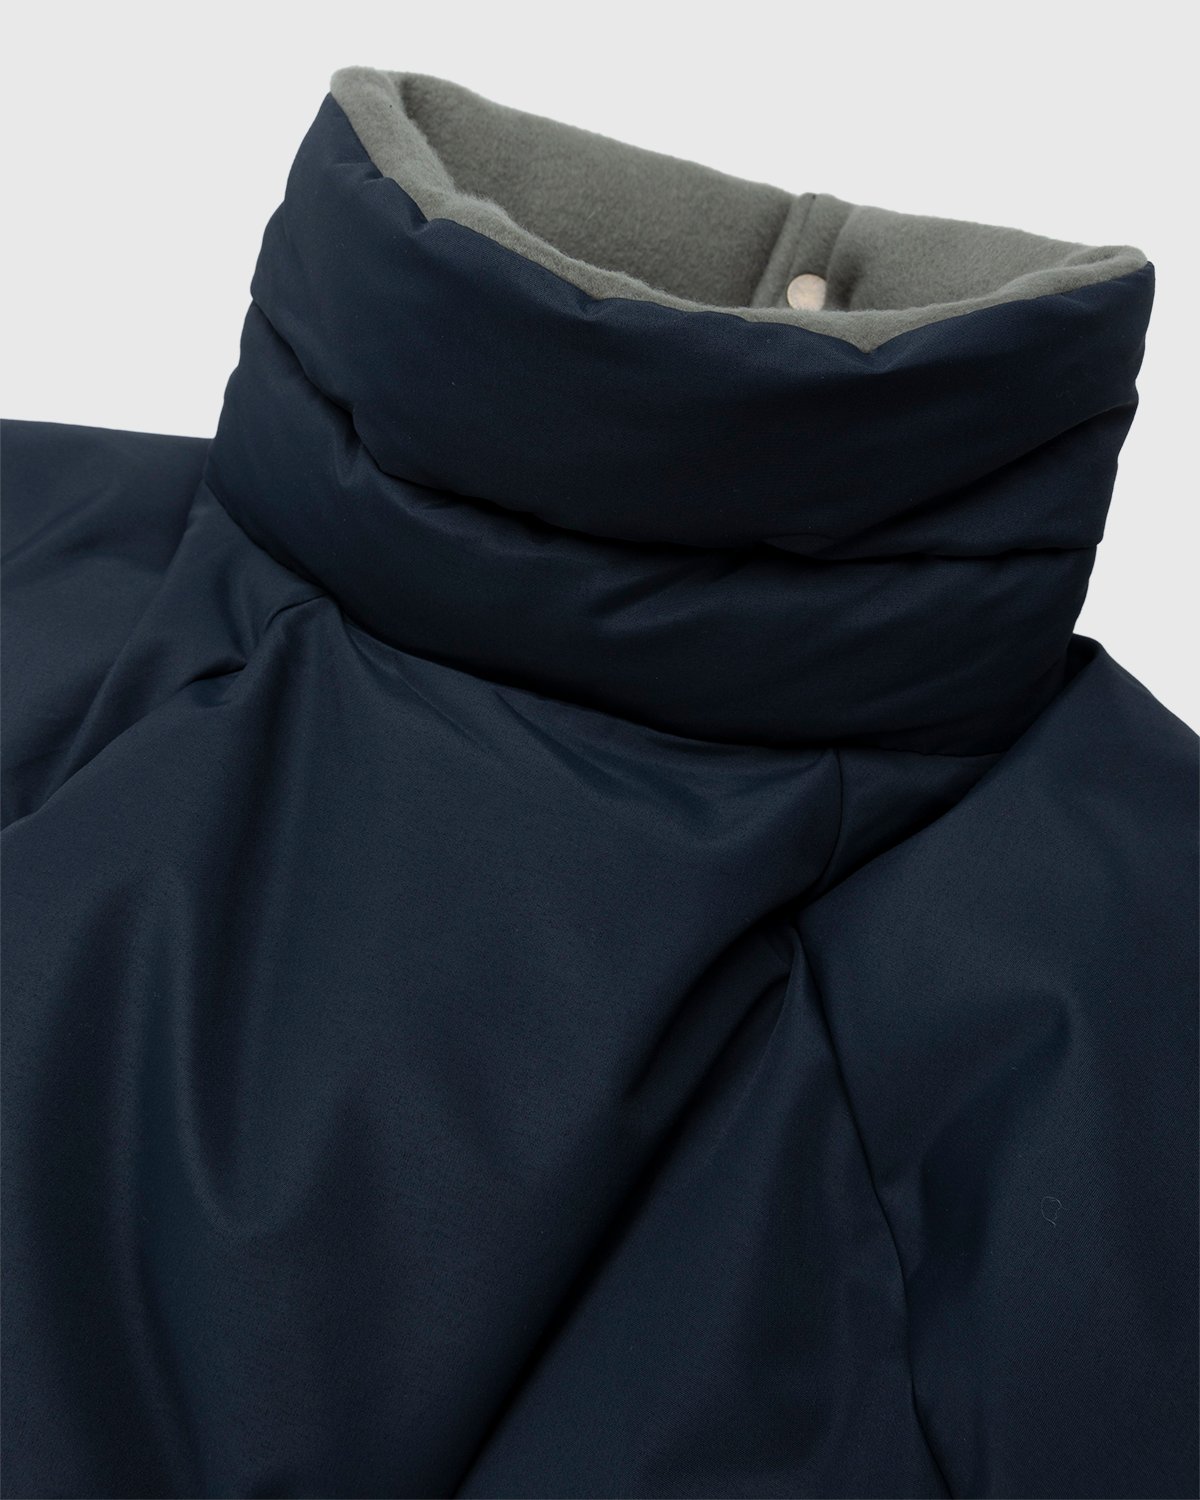 Acne Studios - Down Puffer Jacket Charcoal Grey - Clothing - Grey - Image 5